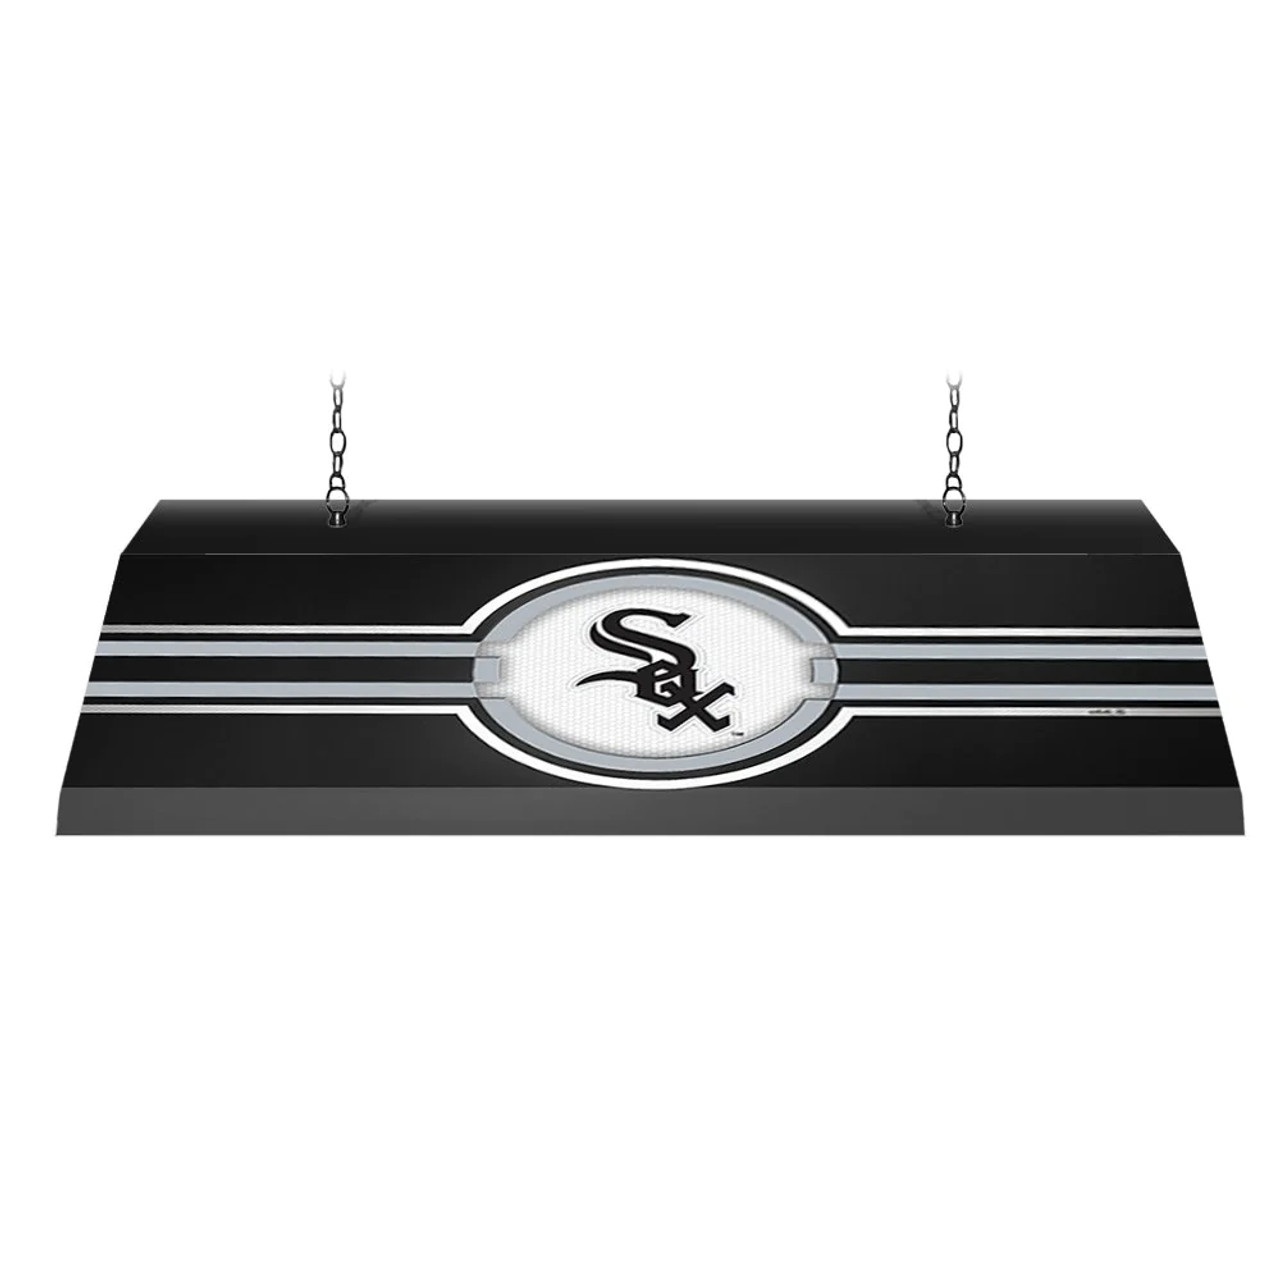 Chicago White Sox: Edge Glow Pool Table Light "A" Version